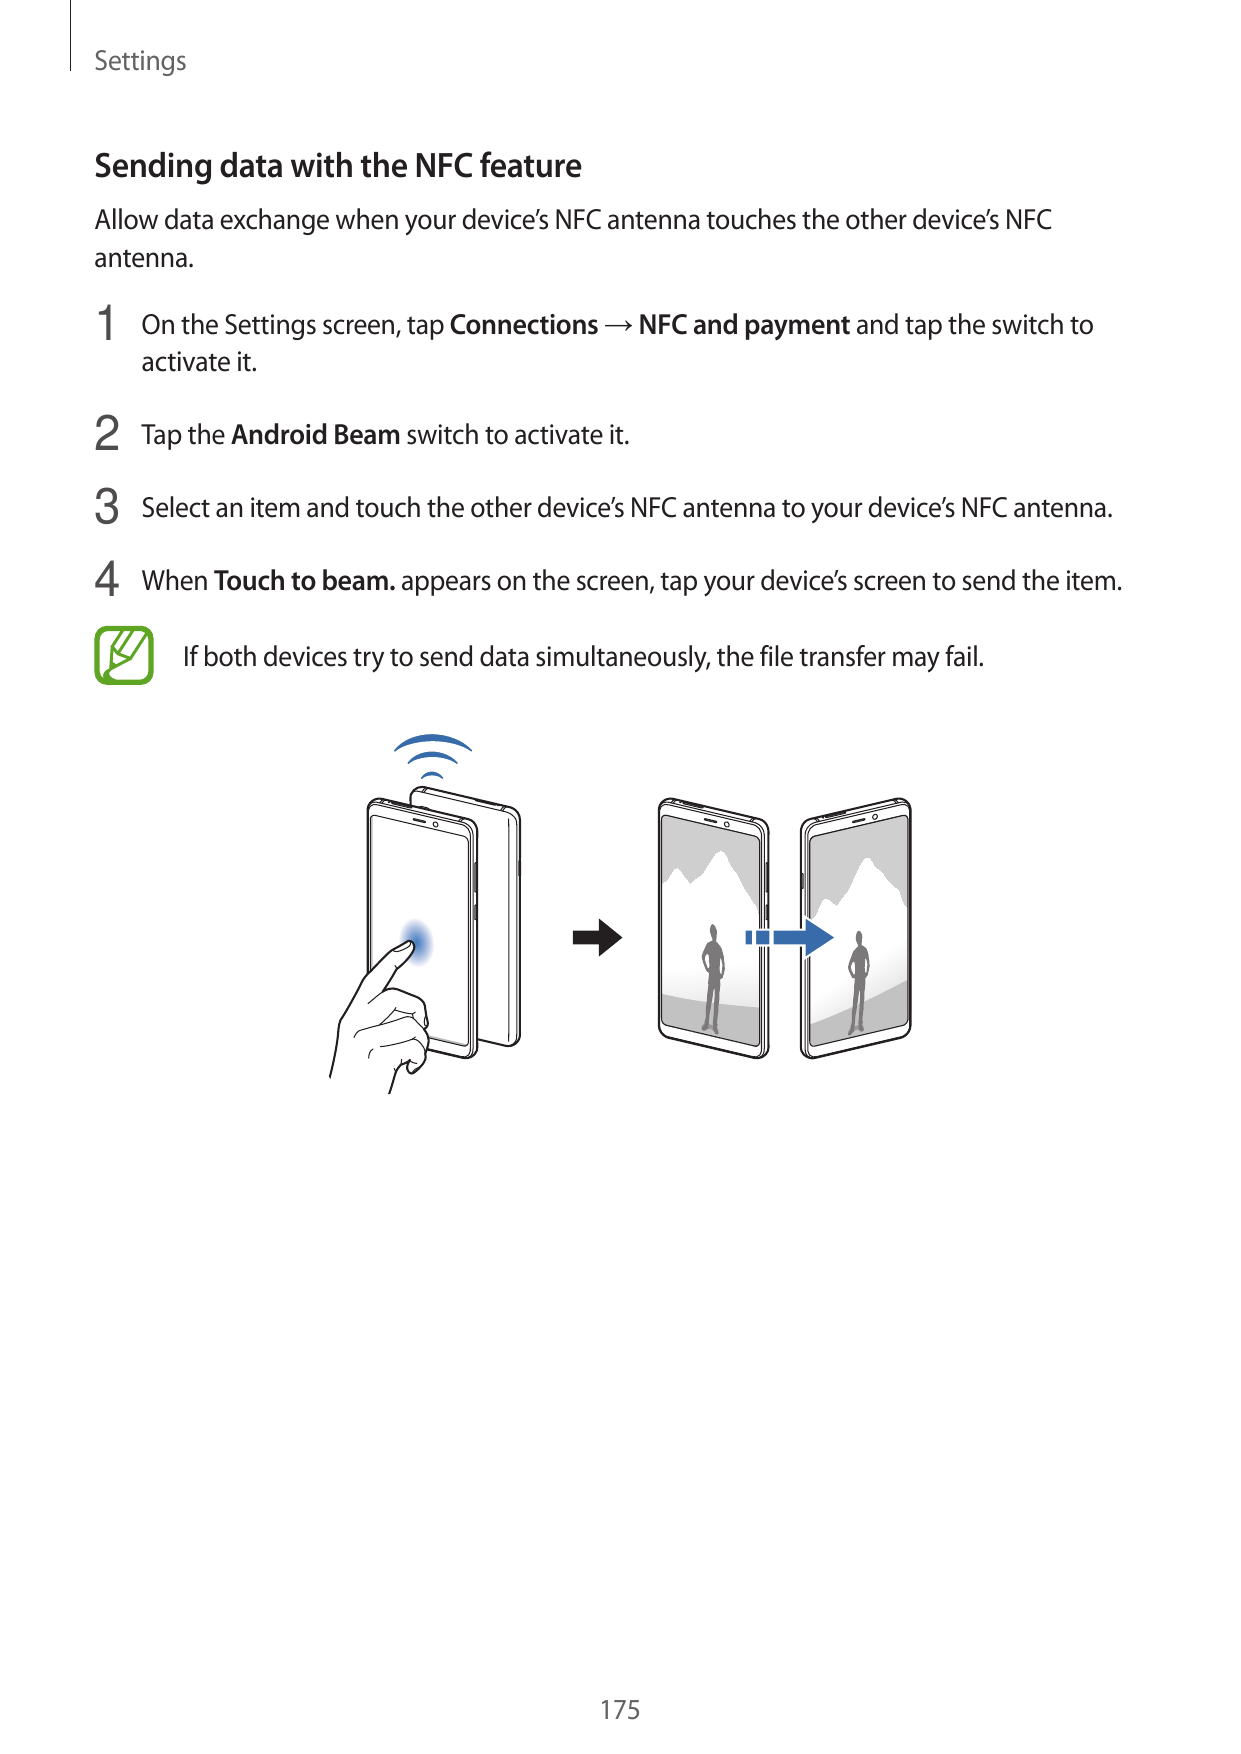 SettingsSending data with the NFC featureAllow data exchange when your device’s NFC antenna touches the other device’s NFCantenn